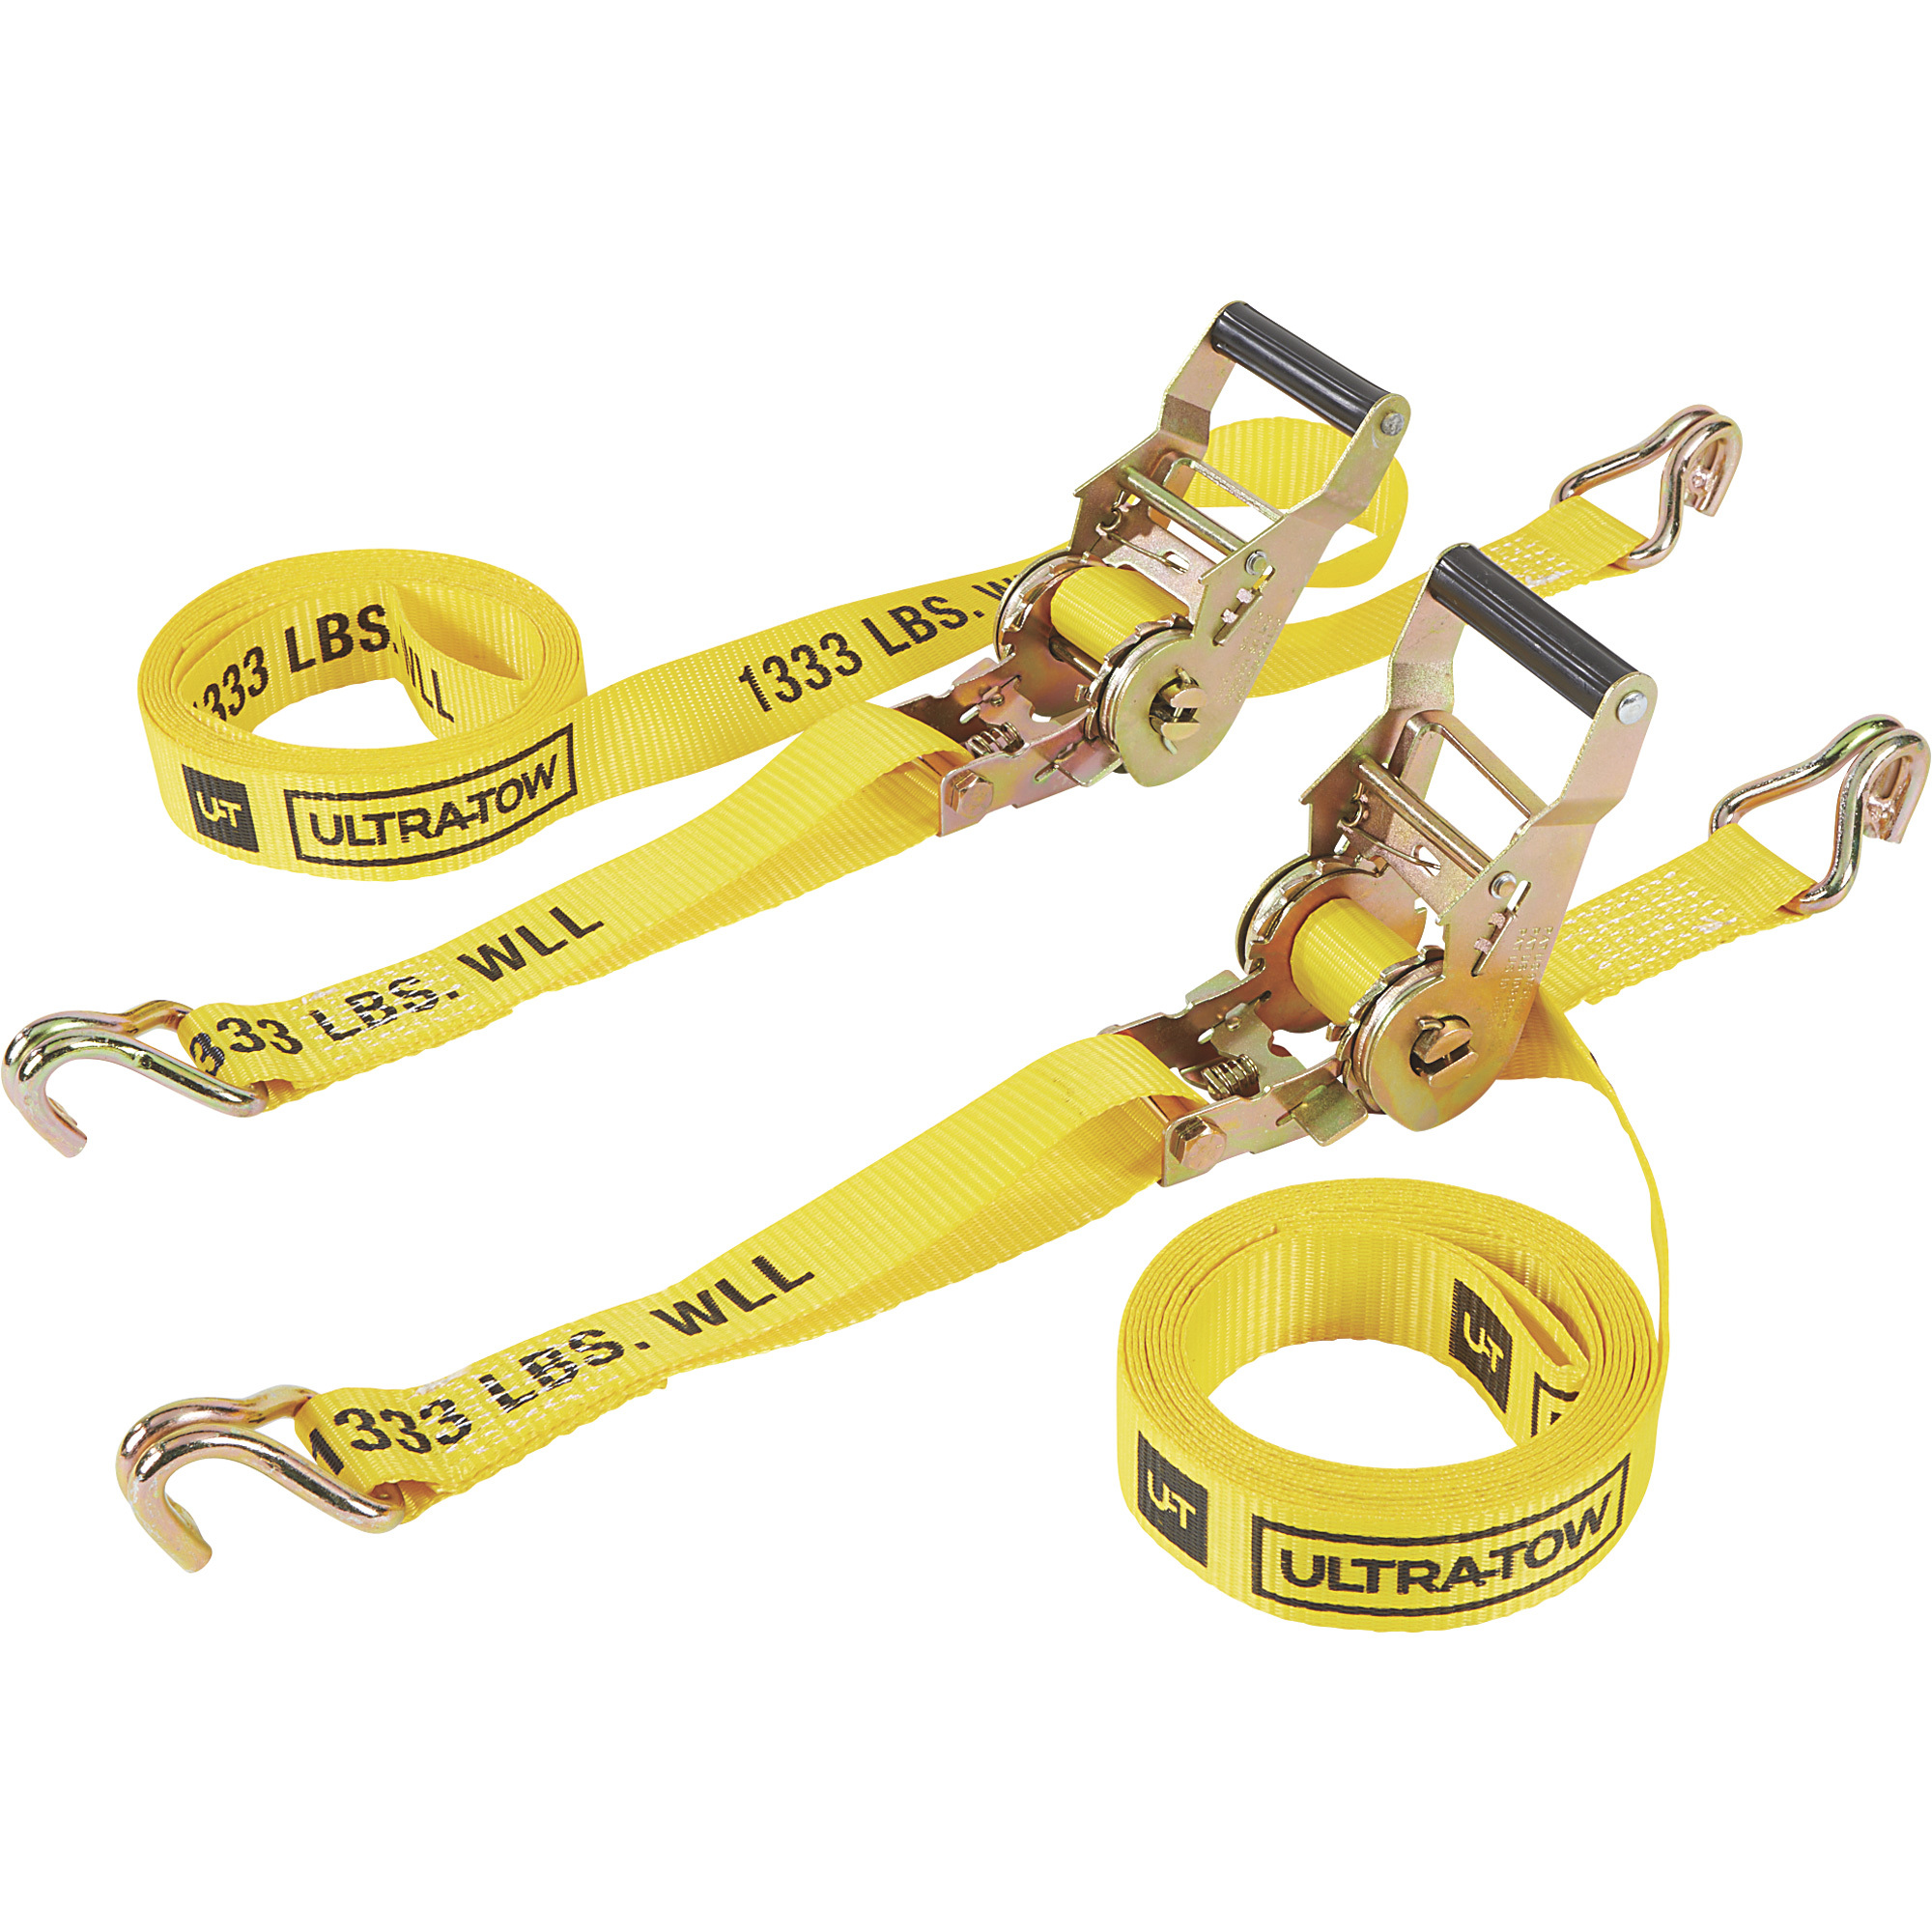 Ultra-Tow 1.5Inch x 14ft. AST Ratchet Strap with J-Hooks, 4,000-Lb. Breaking Strength, 1333-Lb. Working Load, Yellow, Model A615031